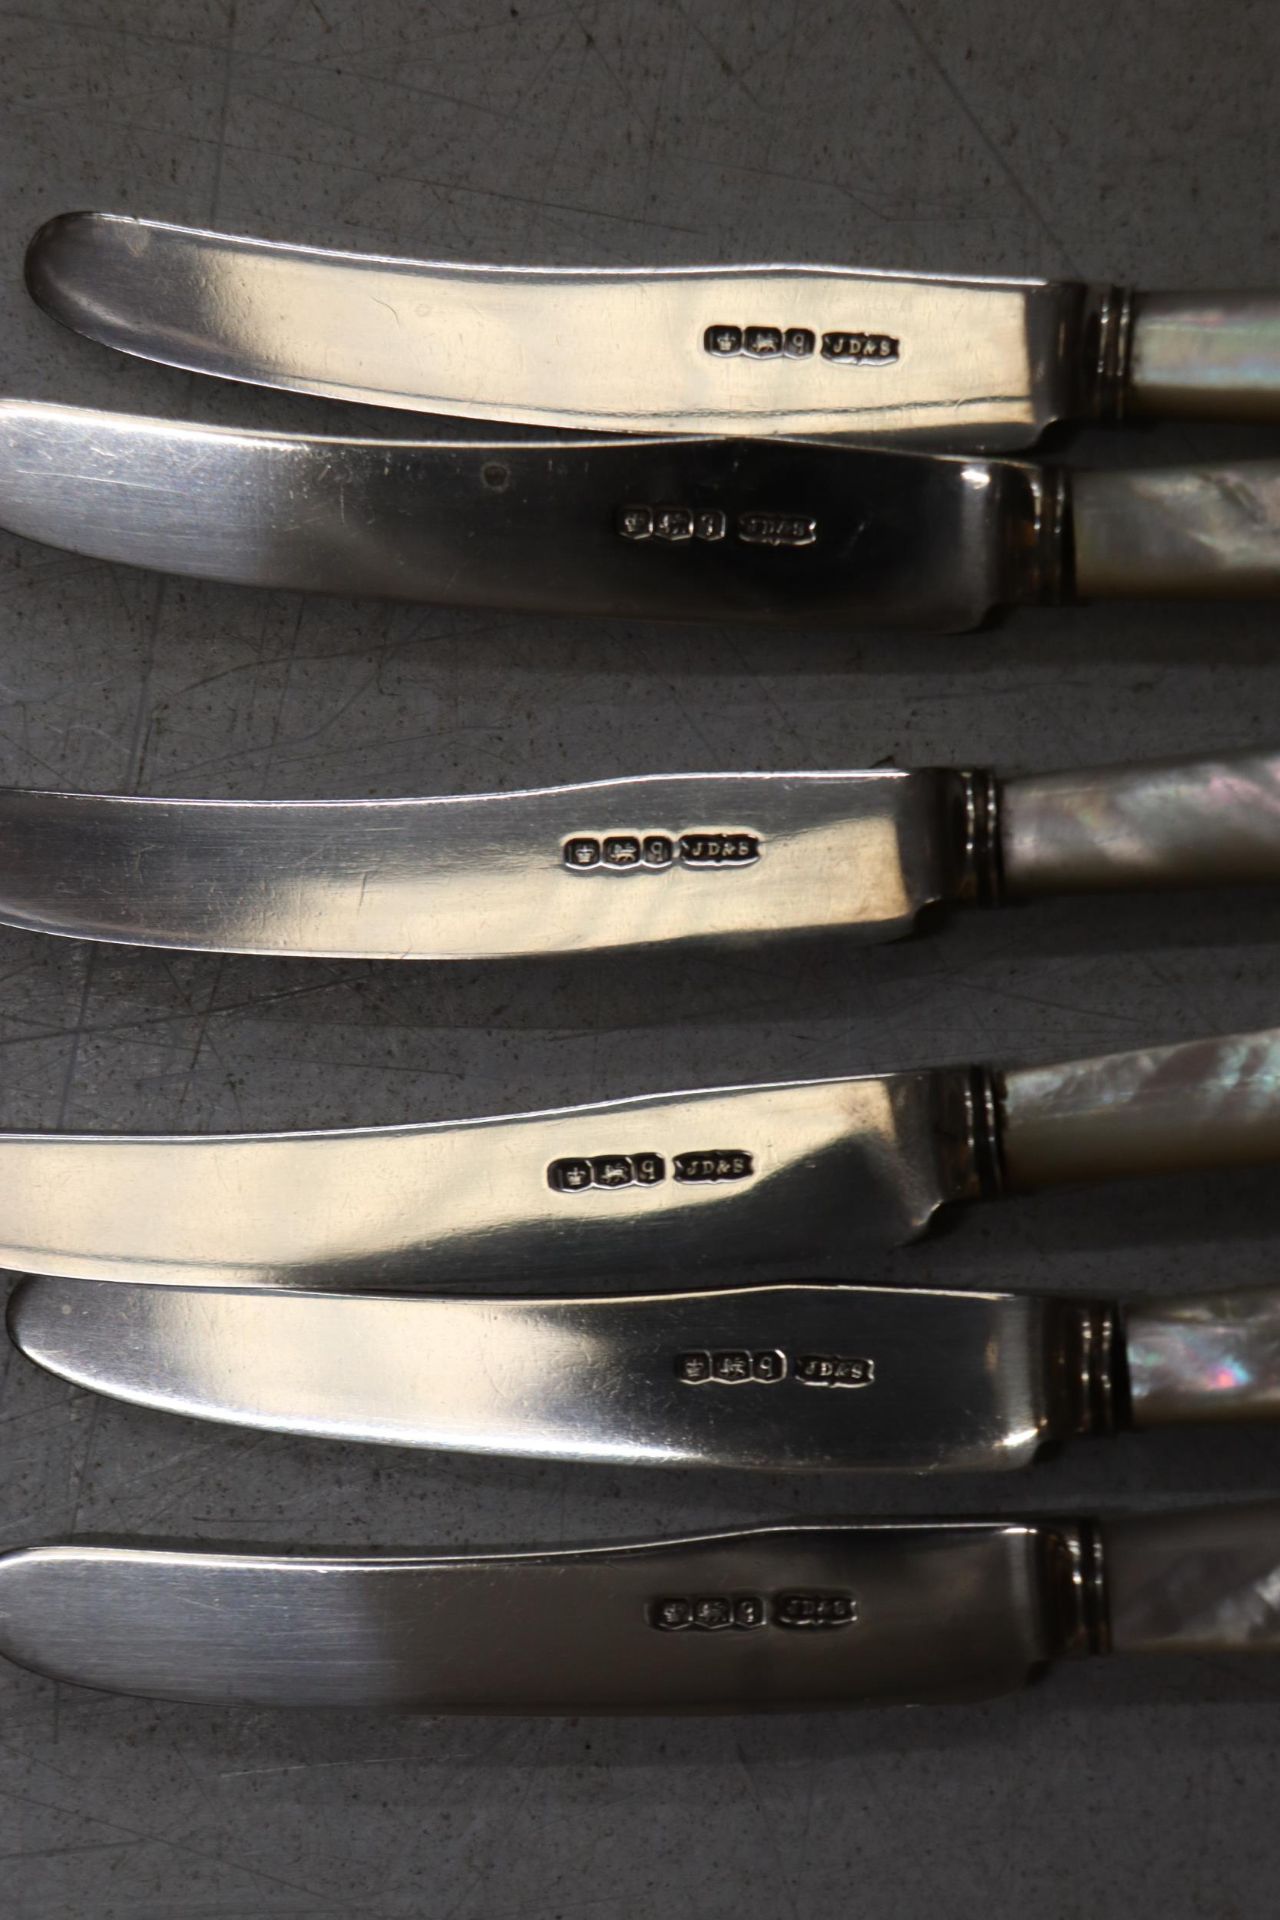 SIX HALLMARKED SHEFFIELD BUTTER KNIVES WITH PEARLISED HANDLES - Image 2 of 7